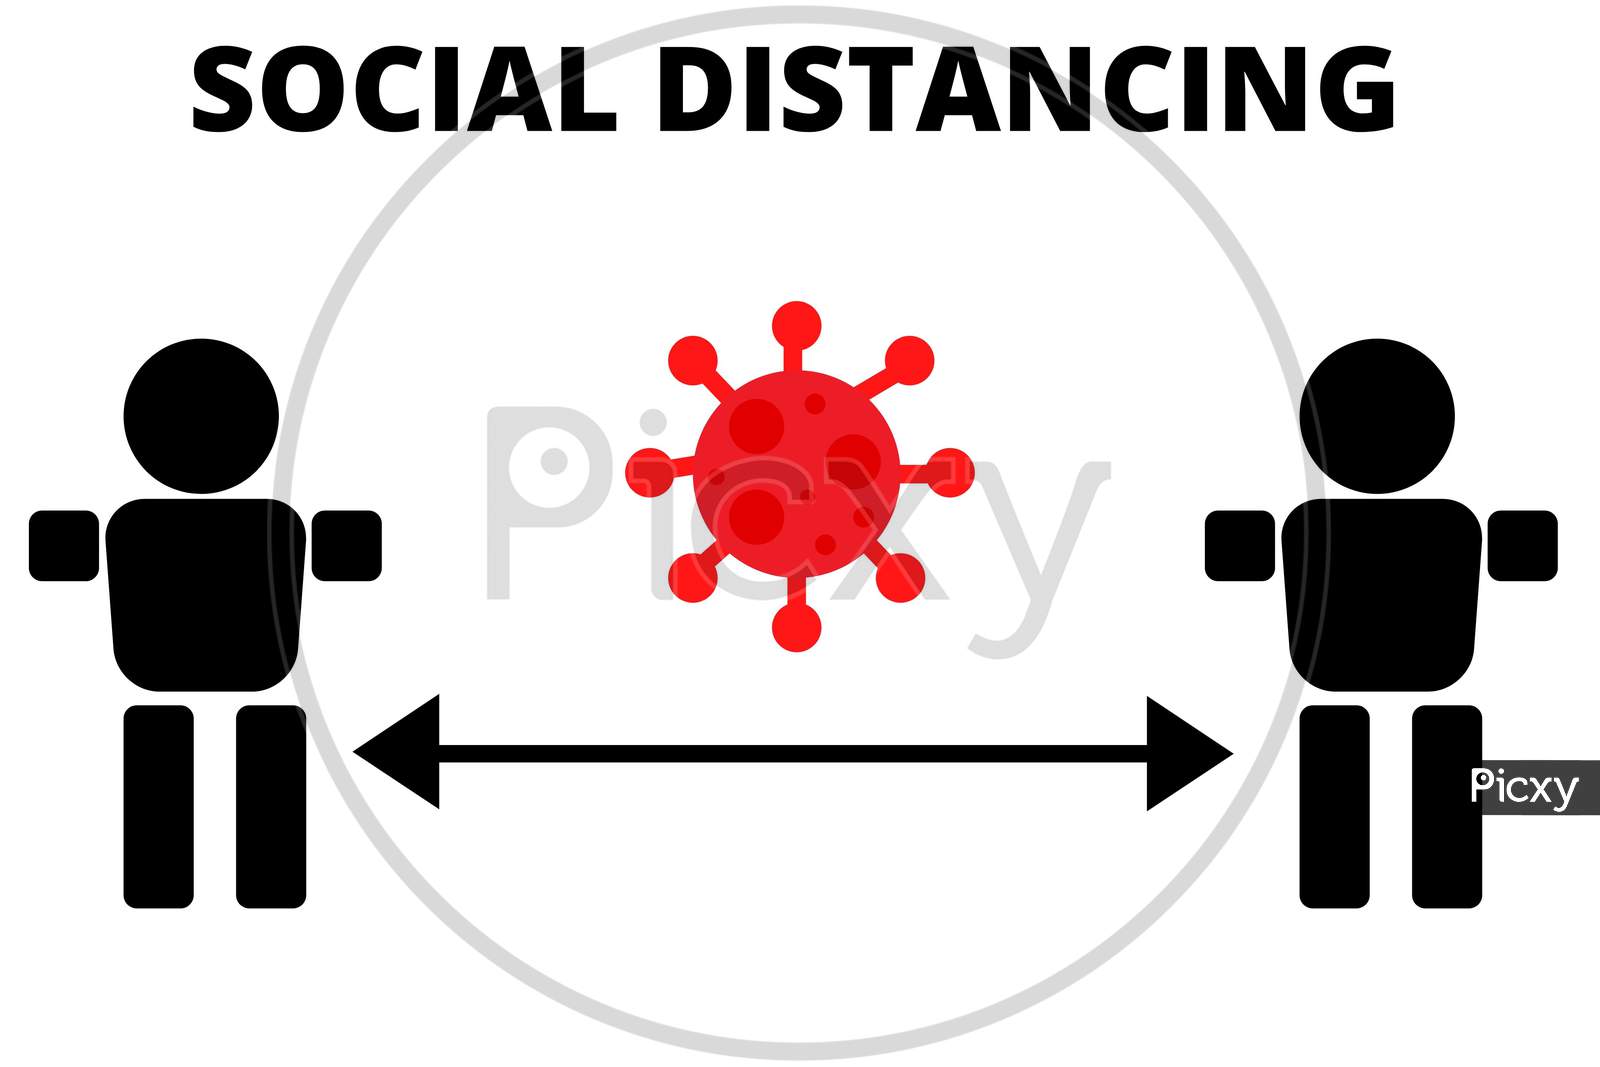 Social distancing, keep distance in public society people to protect COVID-19 coronavirus